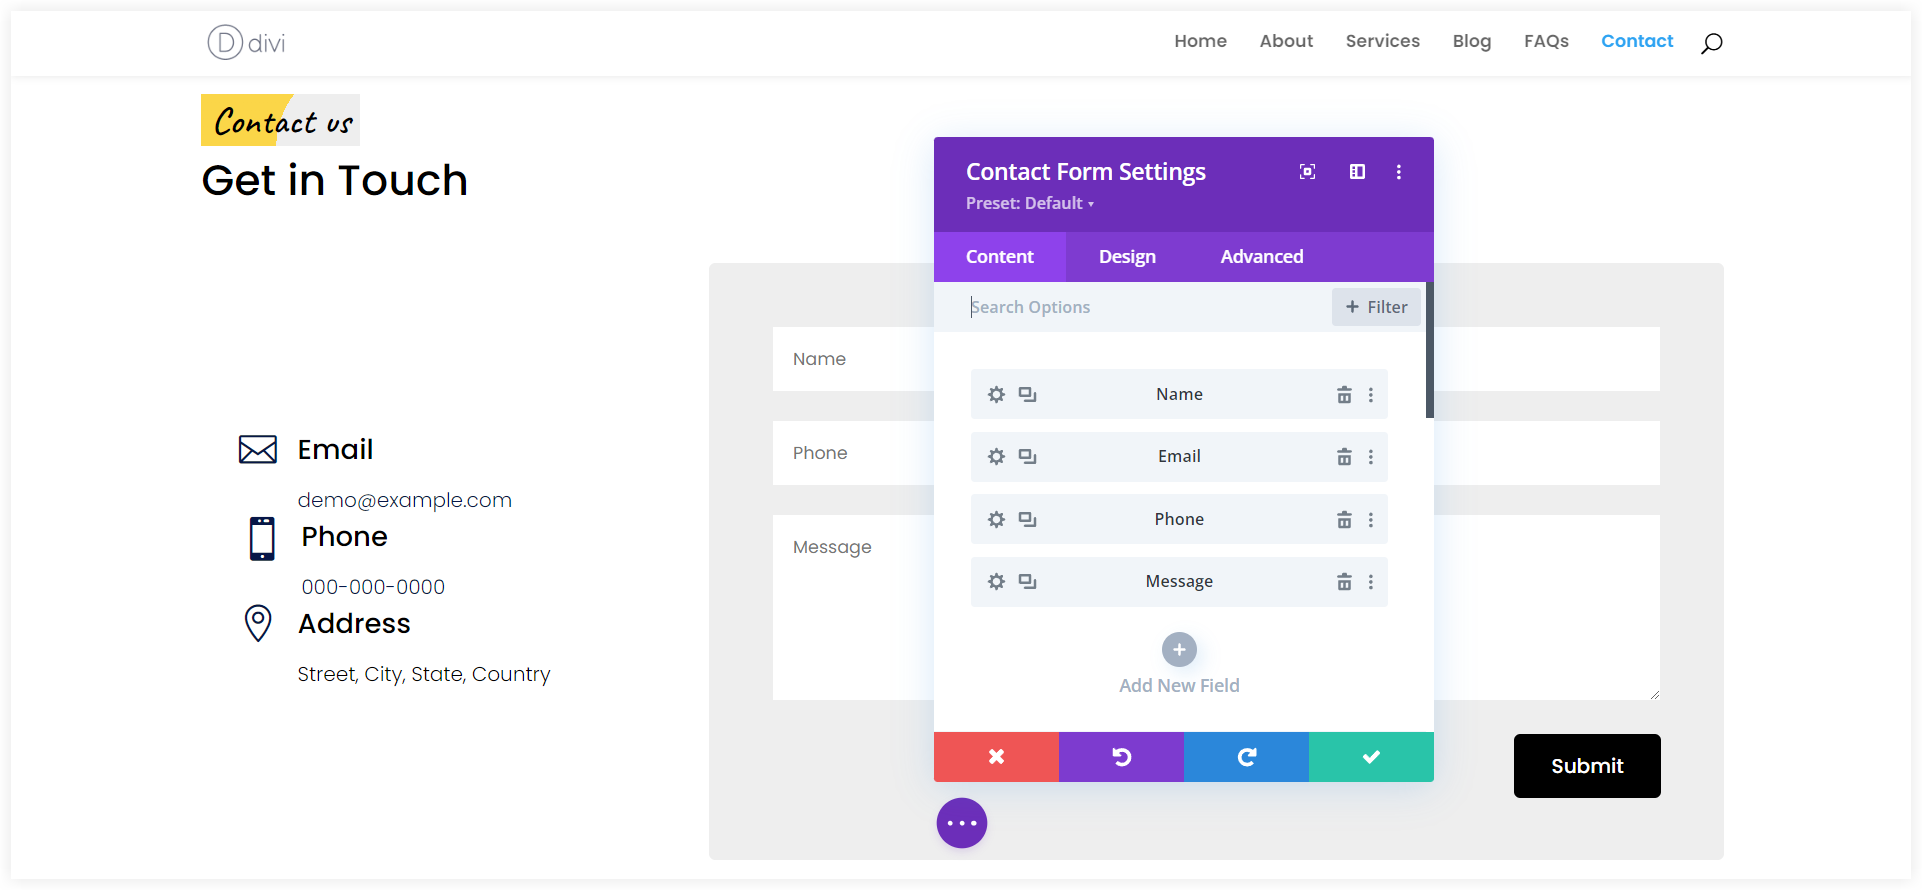 Configure Divi cleaning service contact page layout